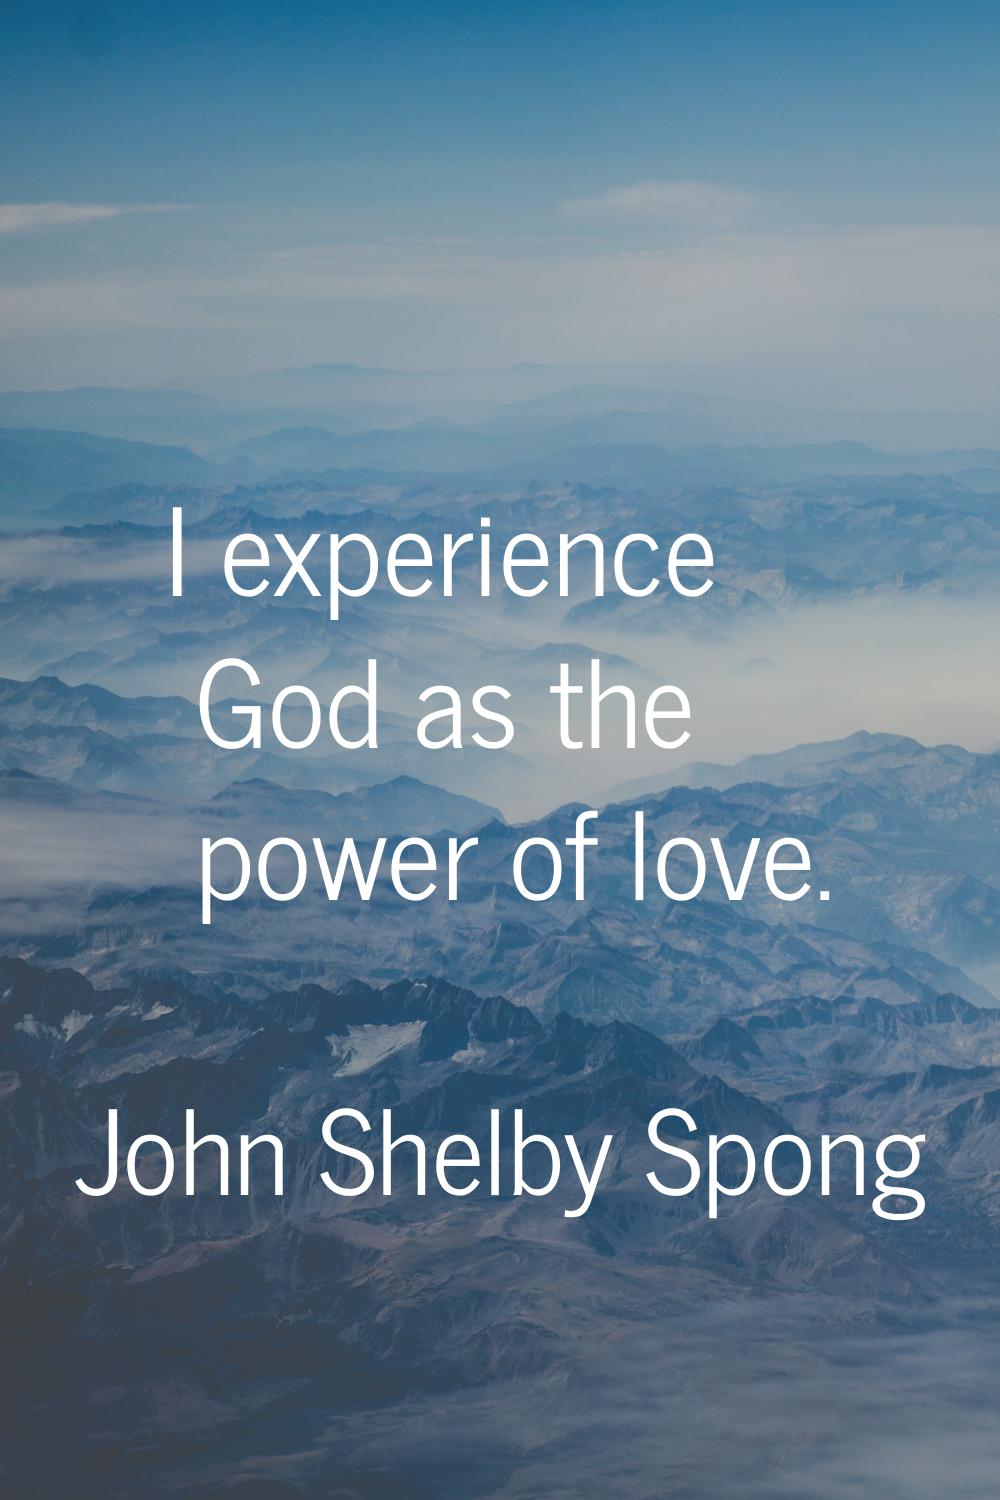 I experience God as the power of love.